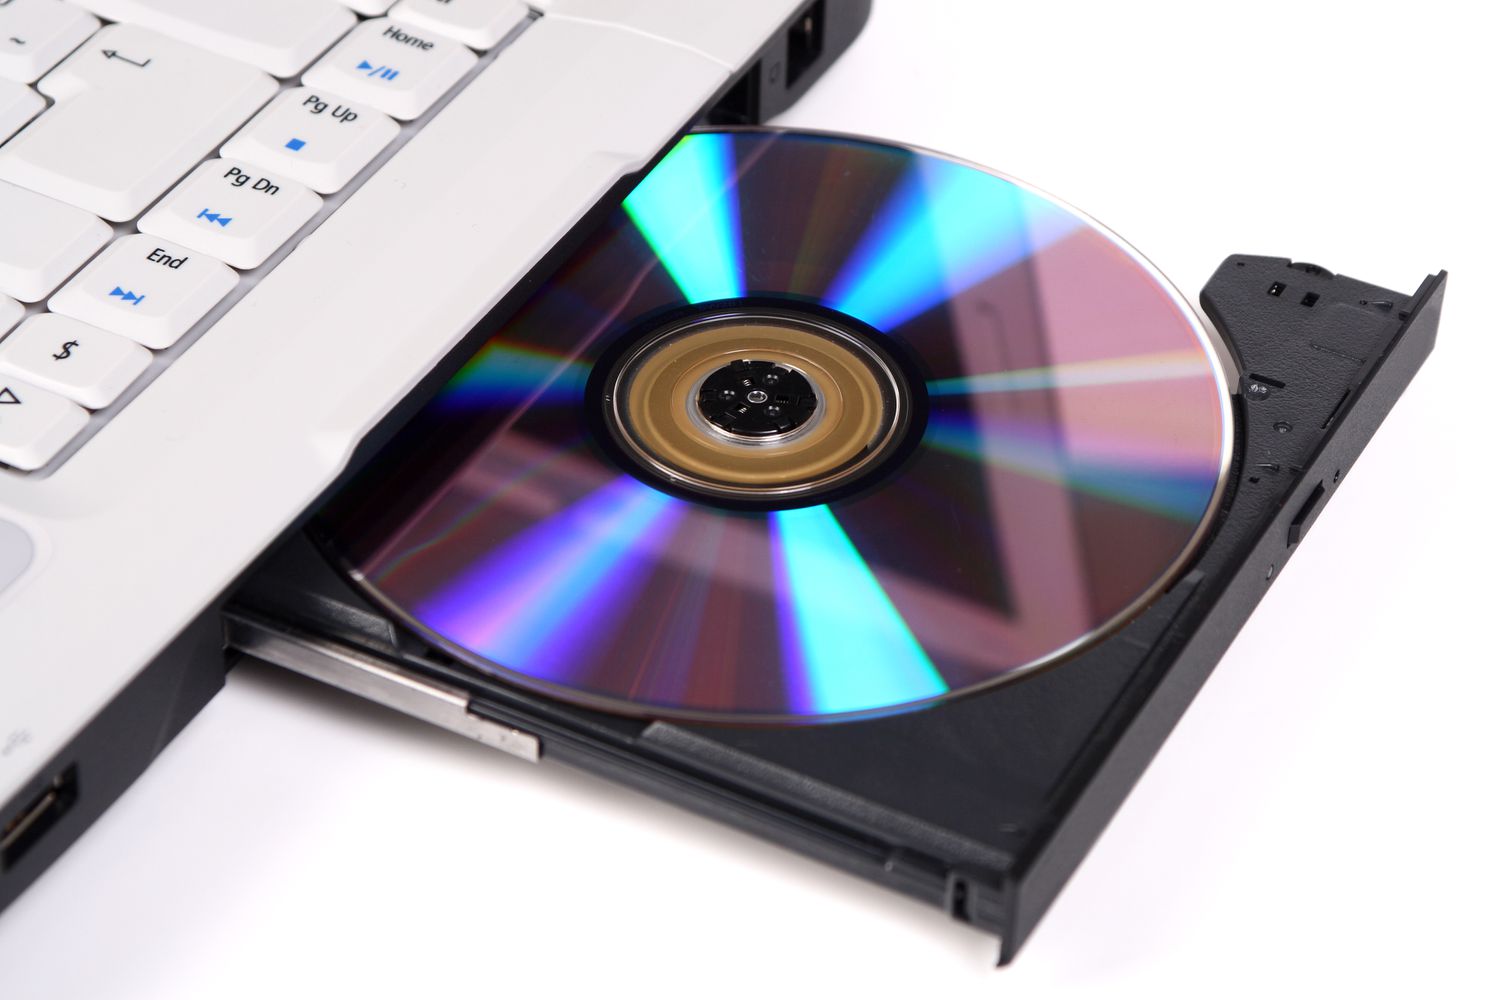 Why Gaming Laptop Doesn’t Have CD Drives